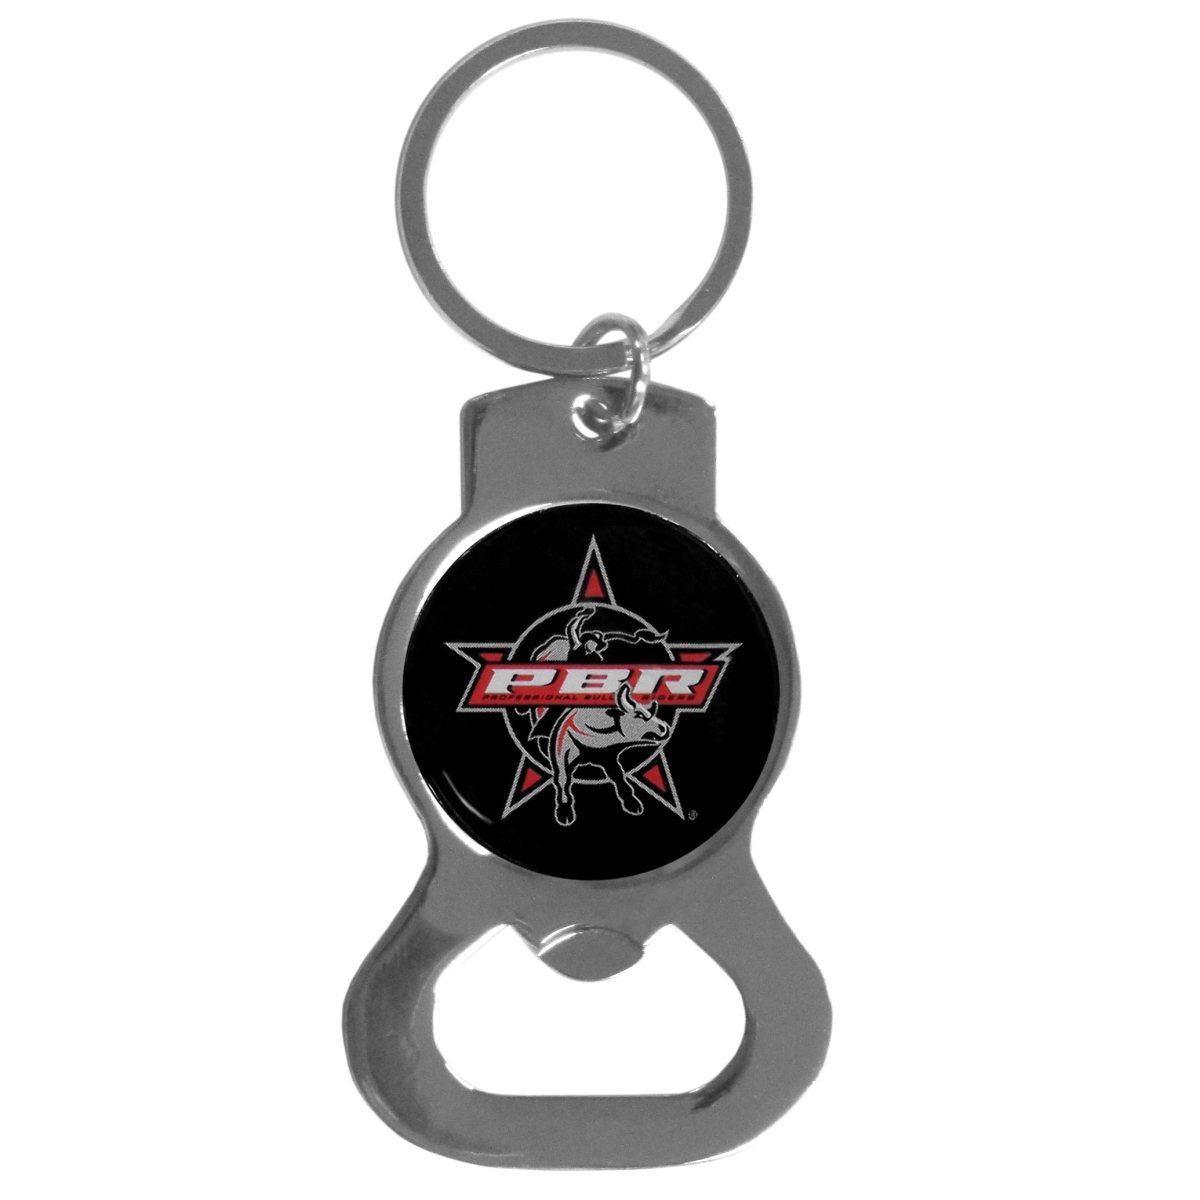 Picture of Siskiyou SPKB1 Unisex Licensed Collectibles PBR Bottle Opener Key Chain - One Size